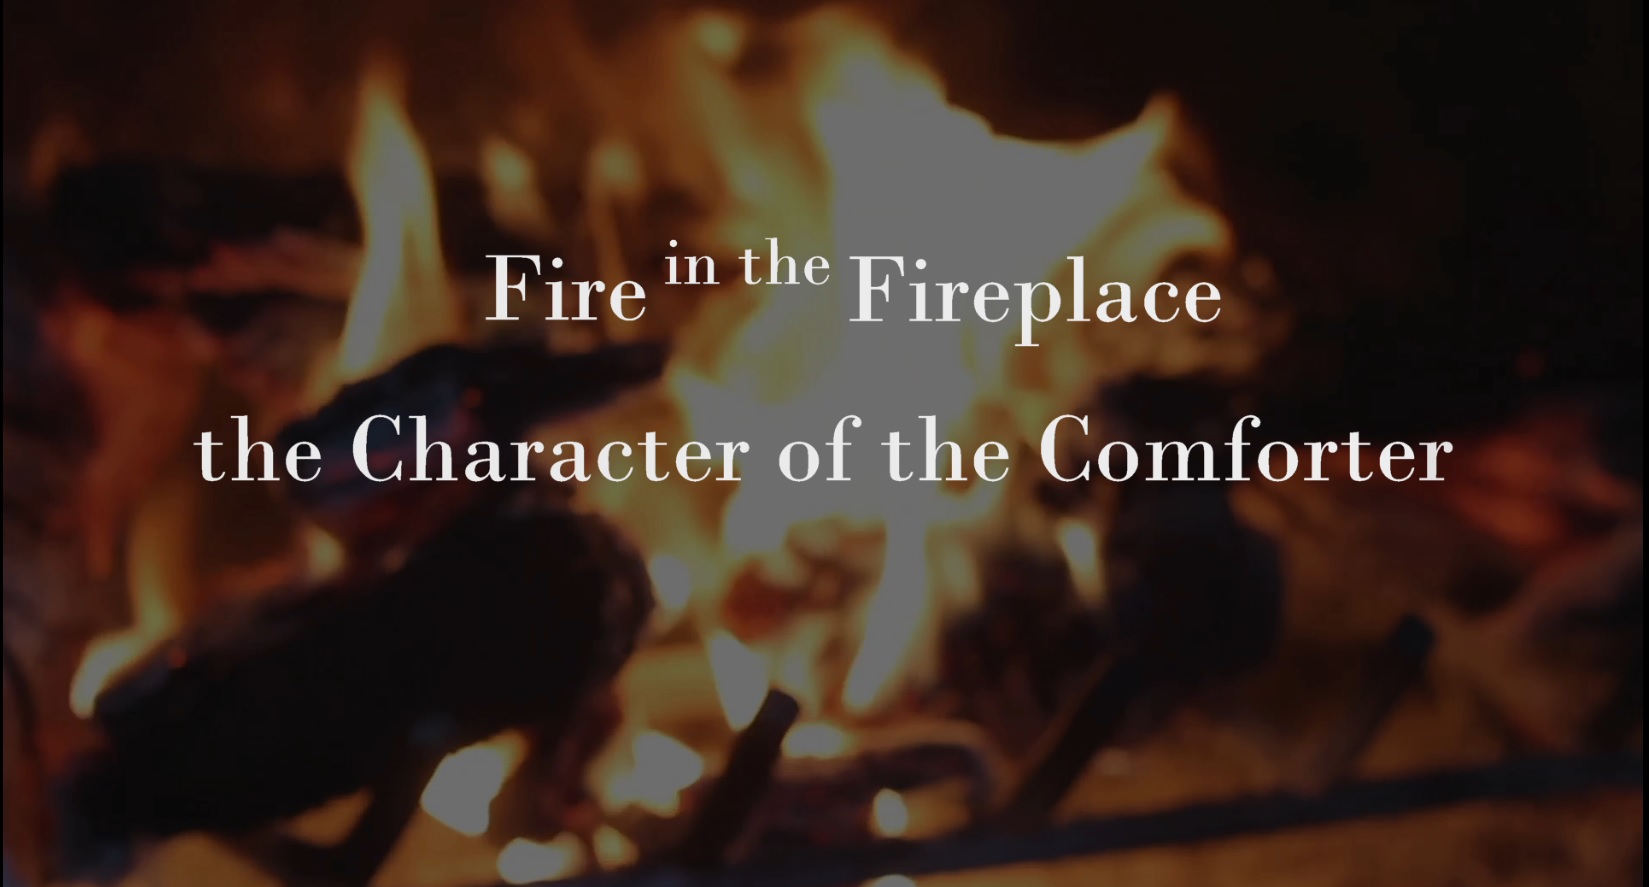 Fire in the Fireplace: the Character of the Comforter